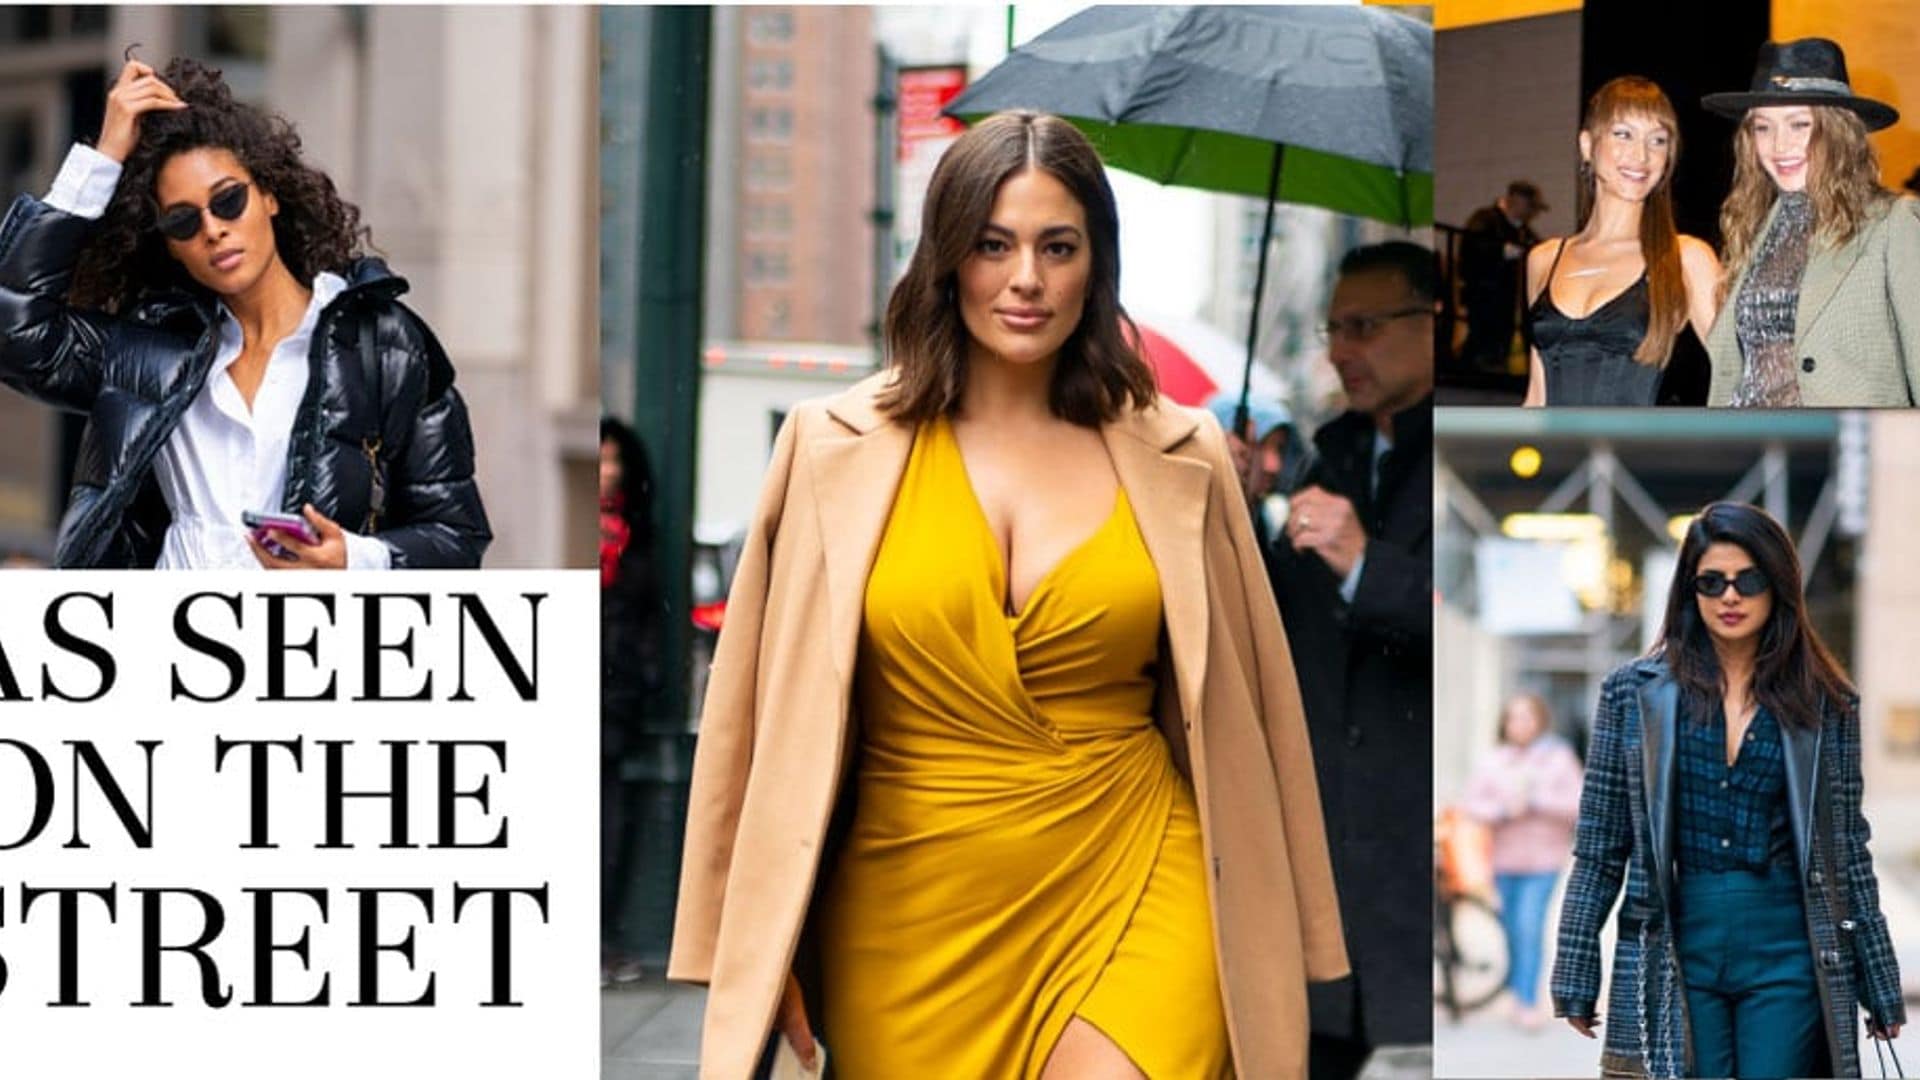 Priyanka Chopra and Ashley Graham are this week's best dressed - here's the coolest celeb street style!